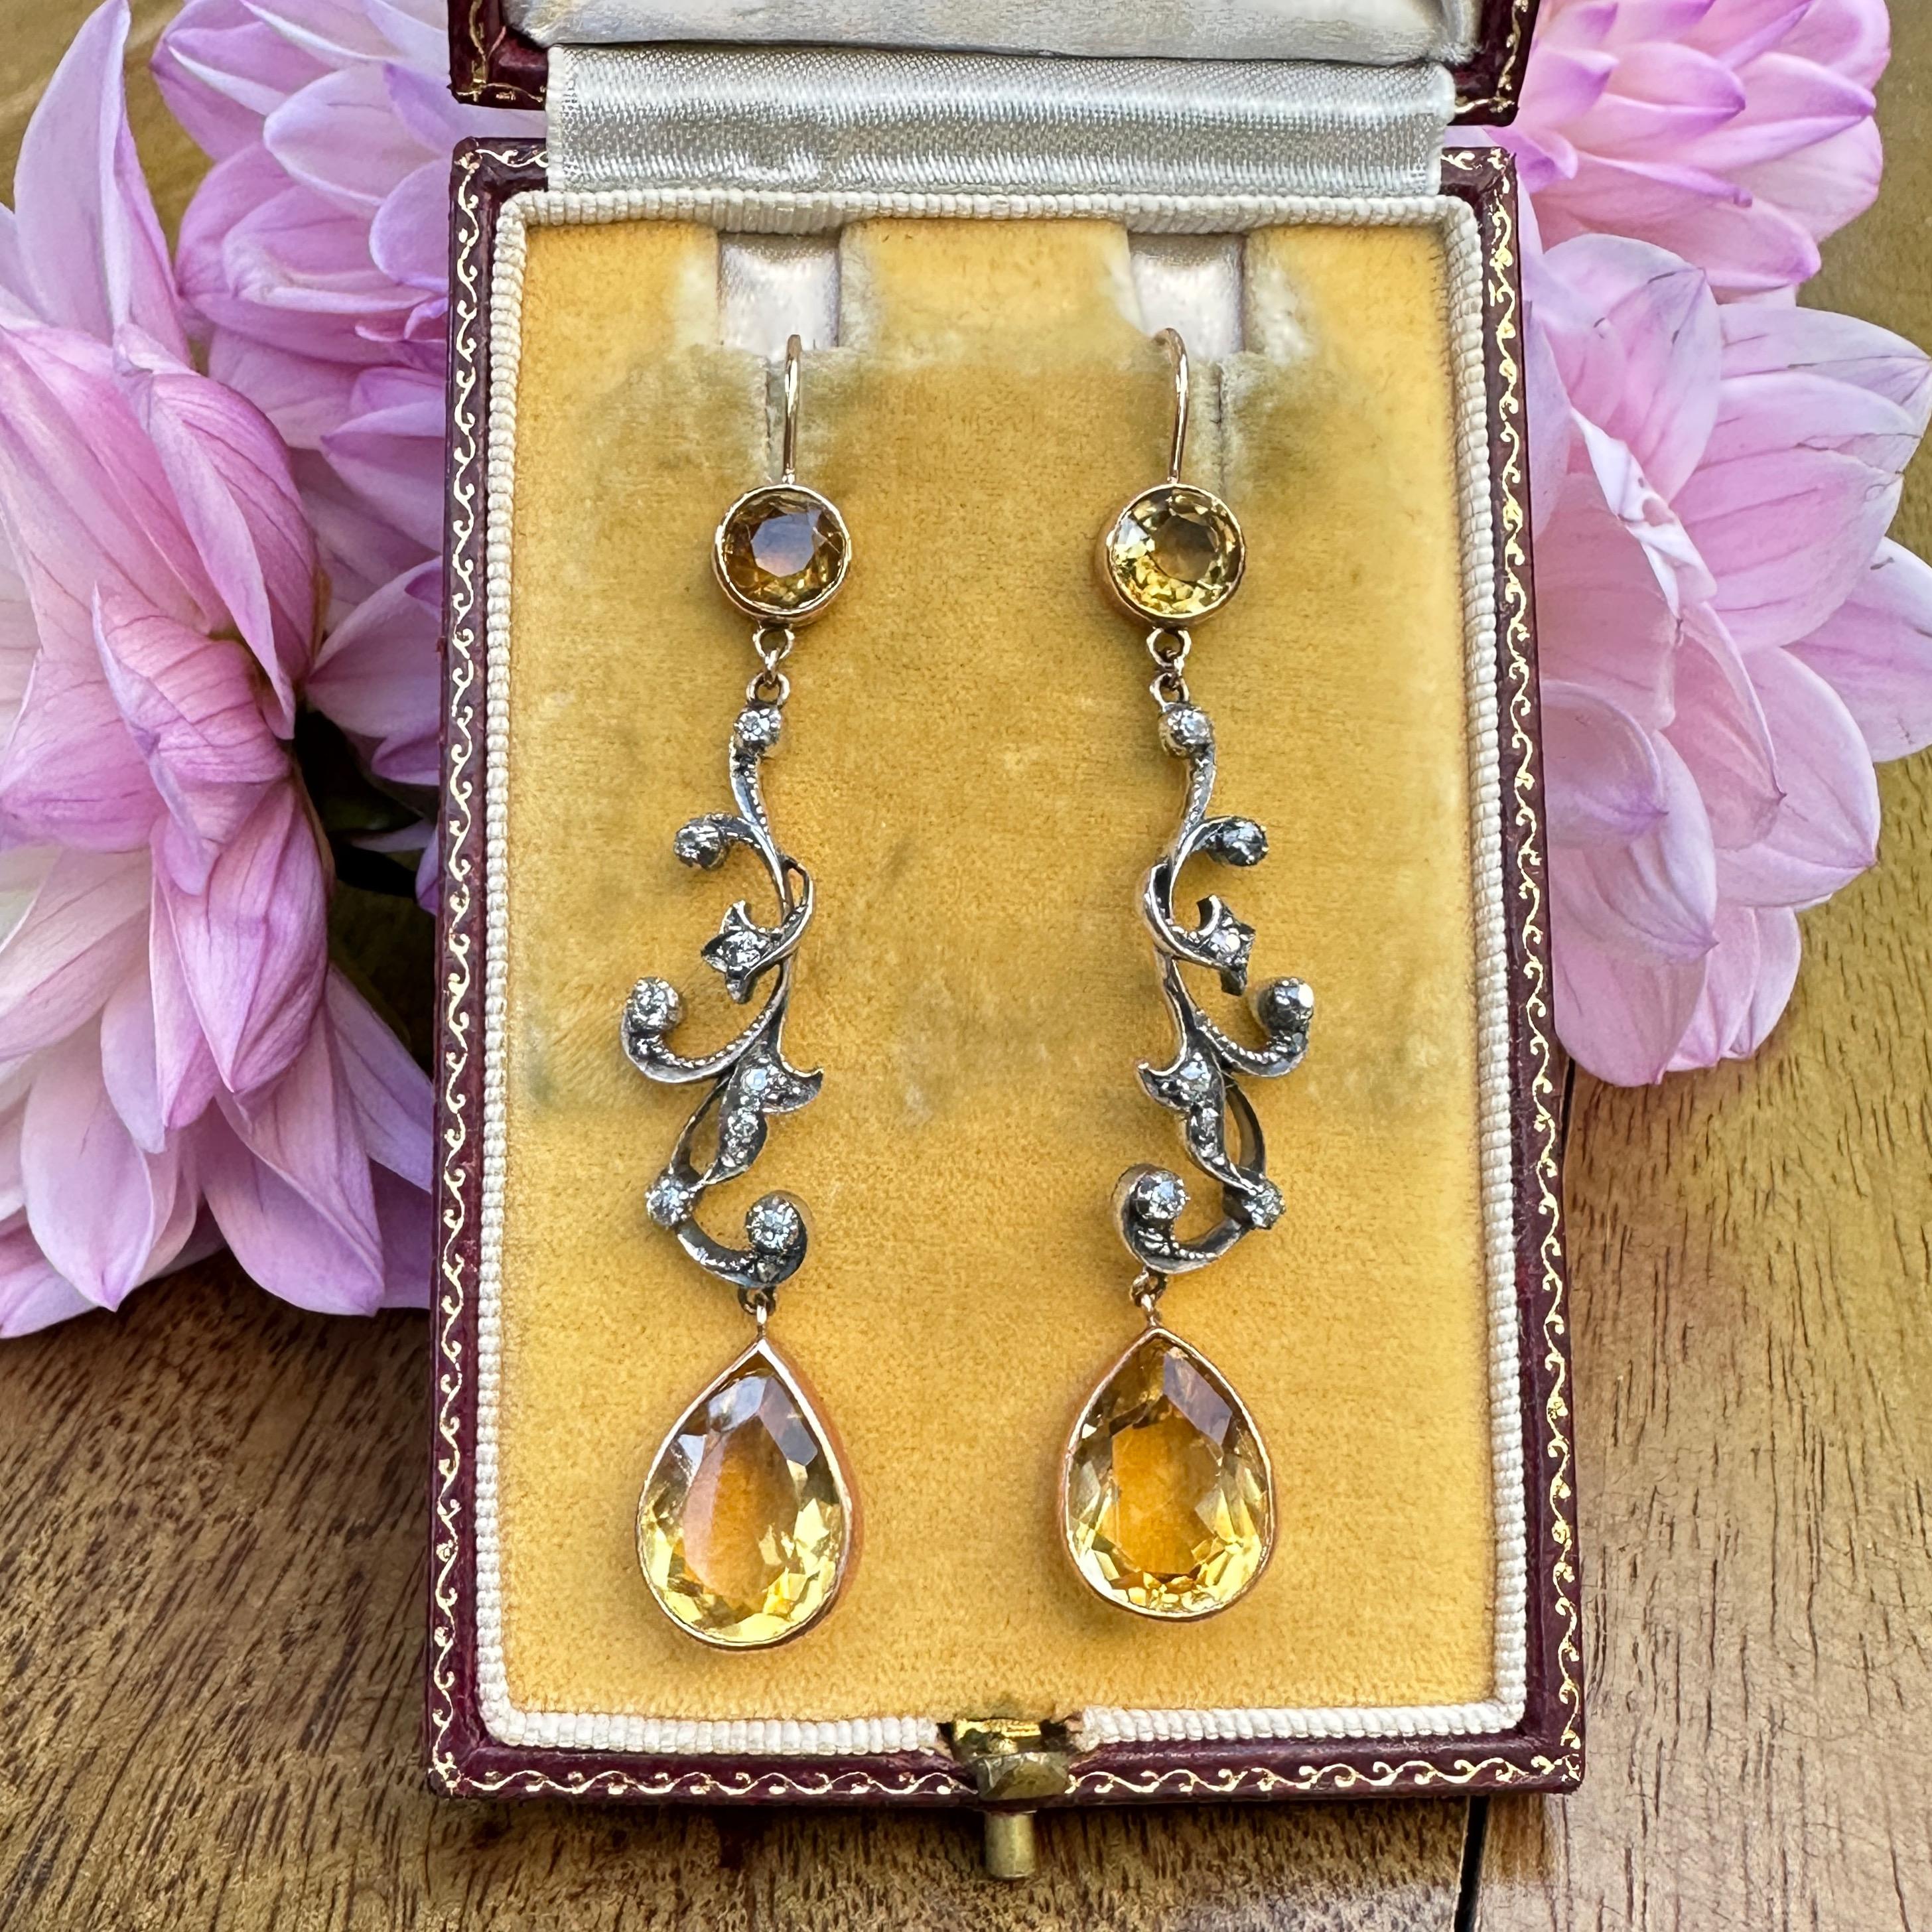 Edwardian Belle Epoque Citrine Diamond 14K Silver Earrings In Good Condition For Sale In Scotts Valley, CA